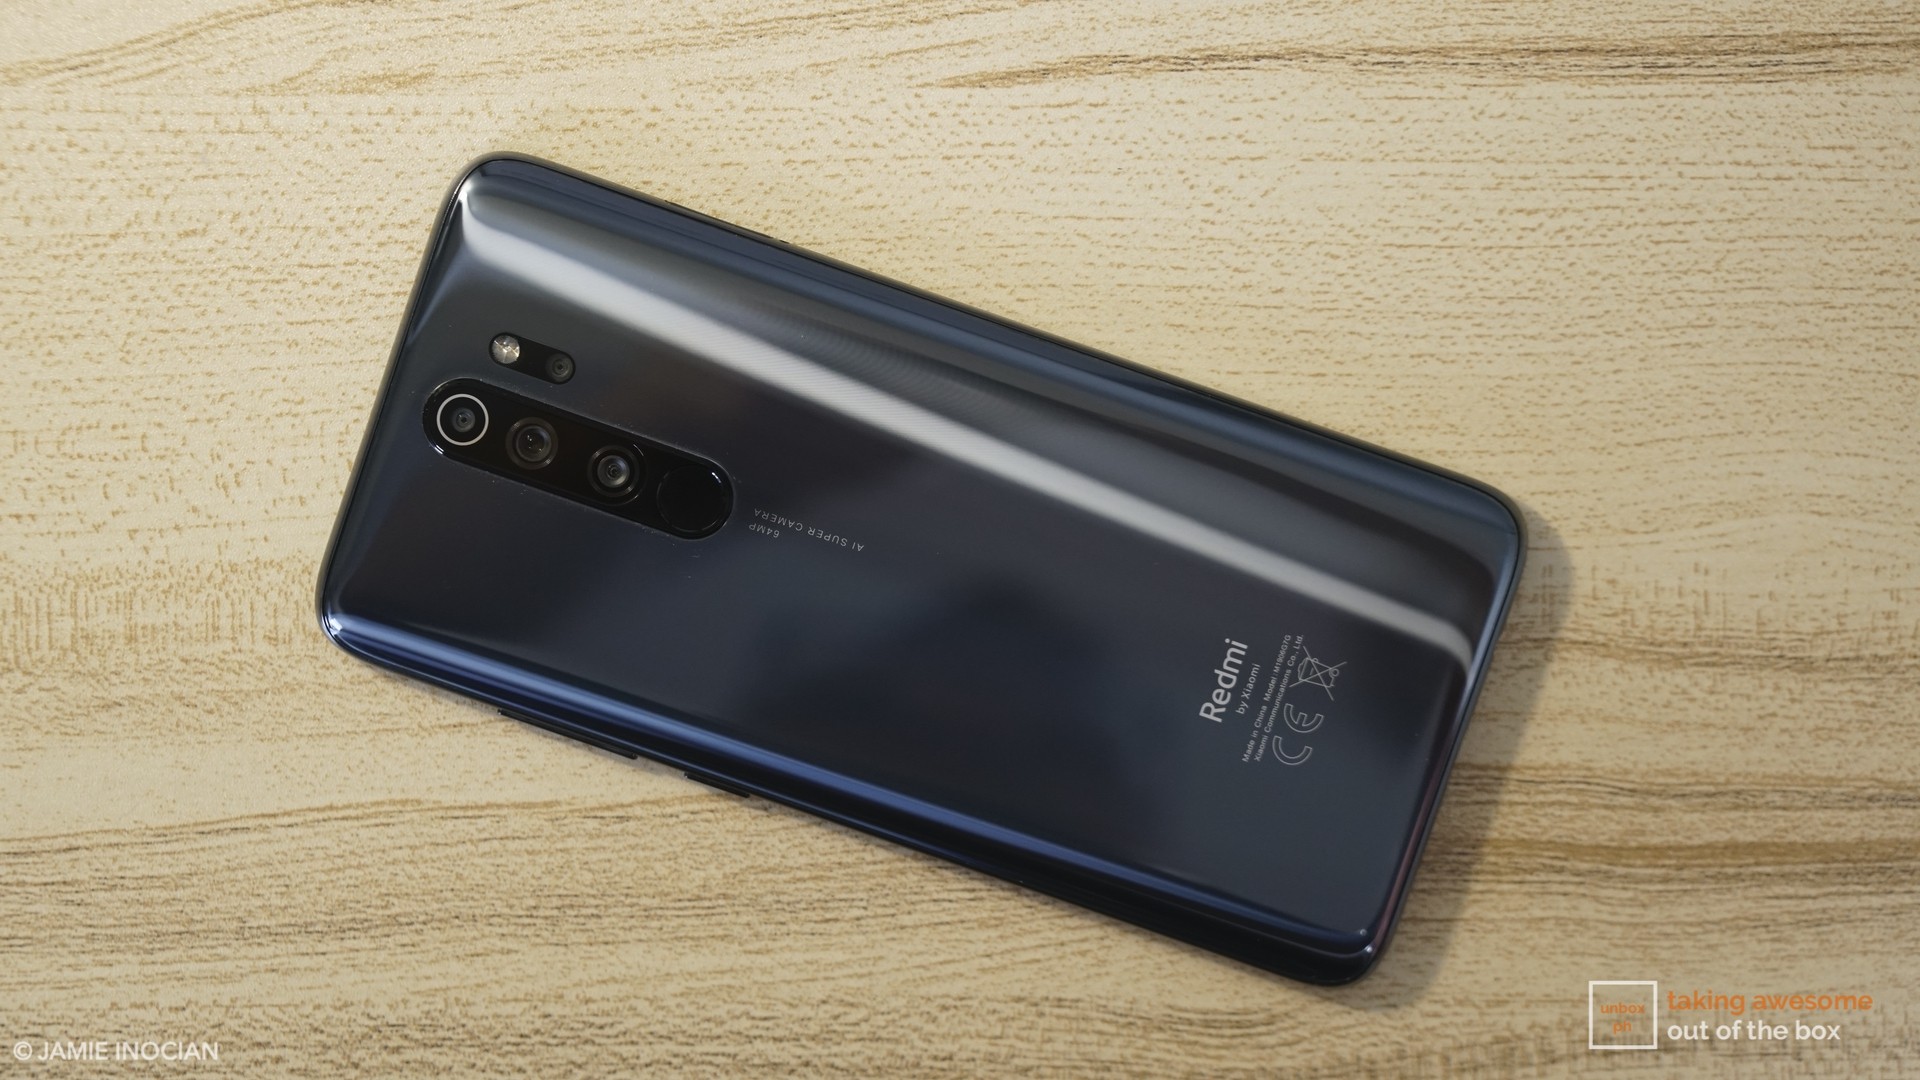 Redmi Note 9 Pro Key Specs Revealed Ahead of Launch